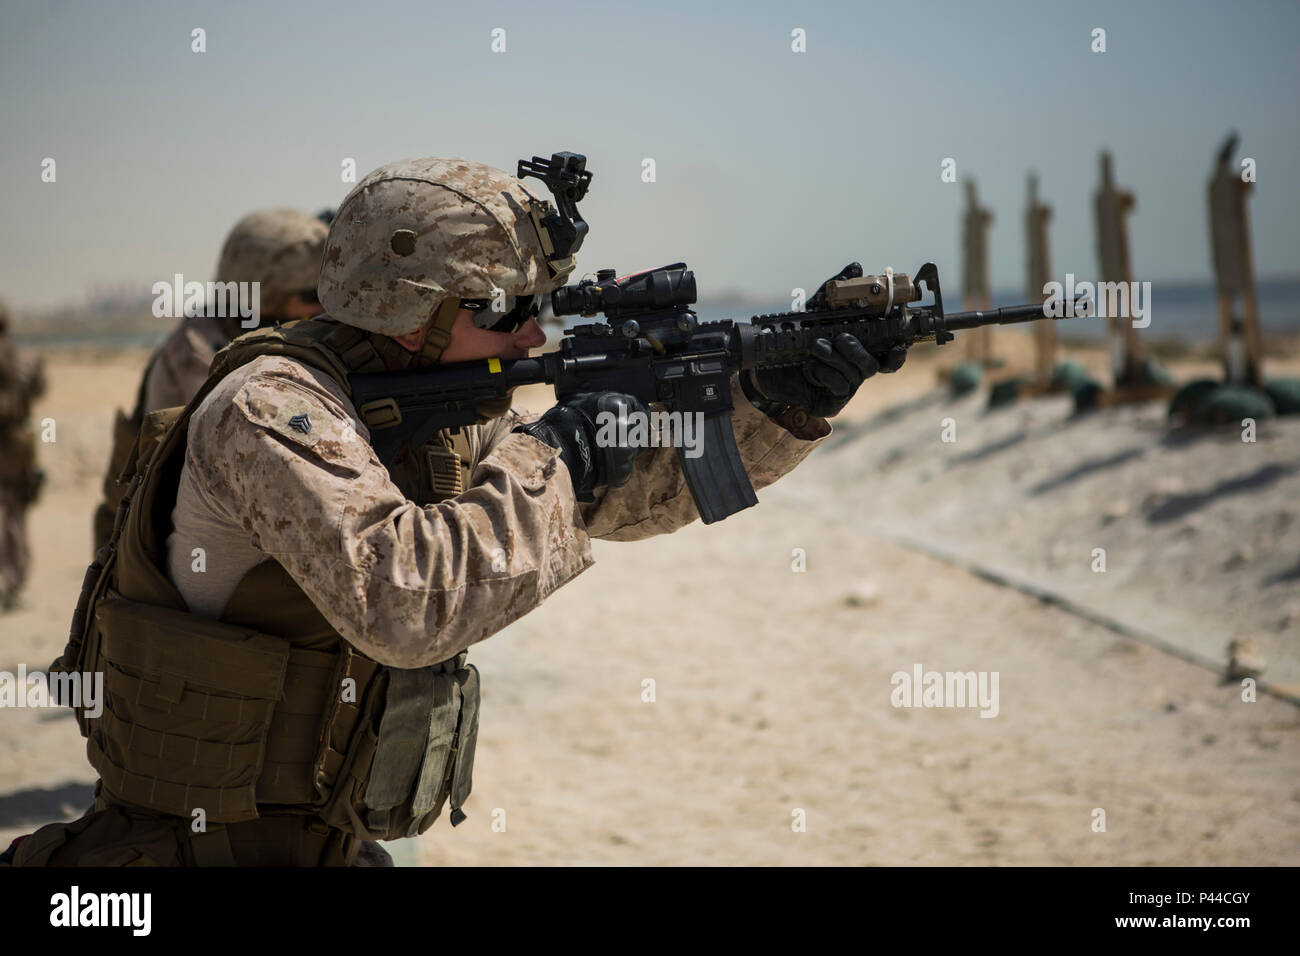 U.S. Marine Corps Sgt. Vincent Shafer, 3rd Platoon Guide with Company C, Marine Wing Support Squadron 373, Special Purpose Marine Air Ground Task Force - Crisis Response - Central Command, fires an M4 carbine during a combat marksmanship practice range, June 5, 2016. SPMAGTF-CR-CC is forward deployed in several host nations, with the ability to respond to a variety of contingencies rapidly and effectively. (U.S. Marine Corps photo by Sgt. Donald Holbert/ Released) Stock Photo